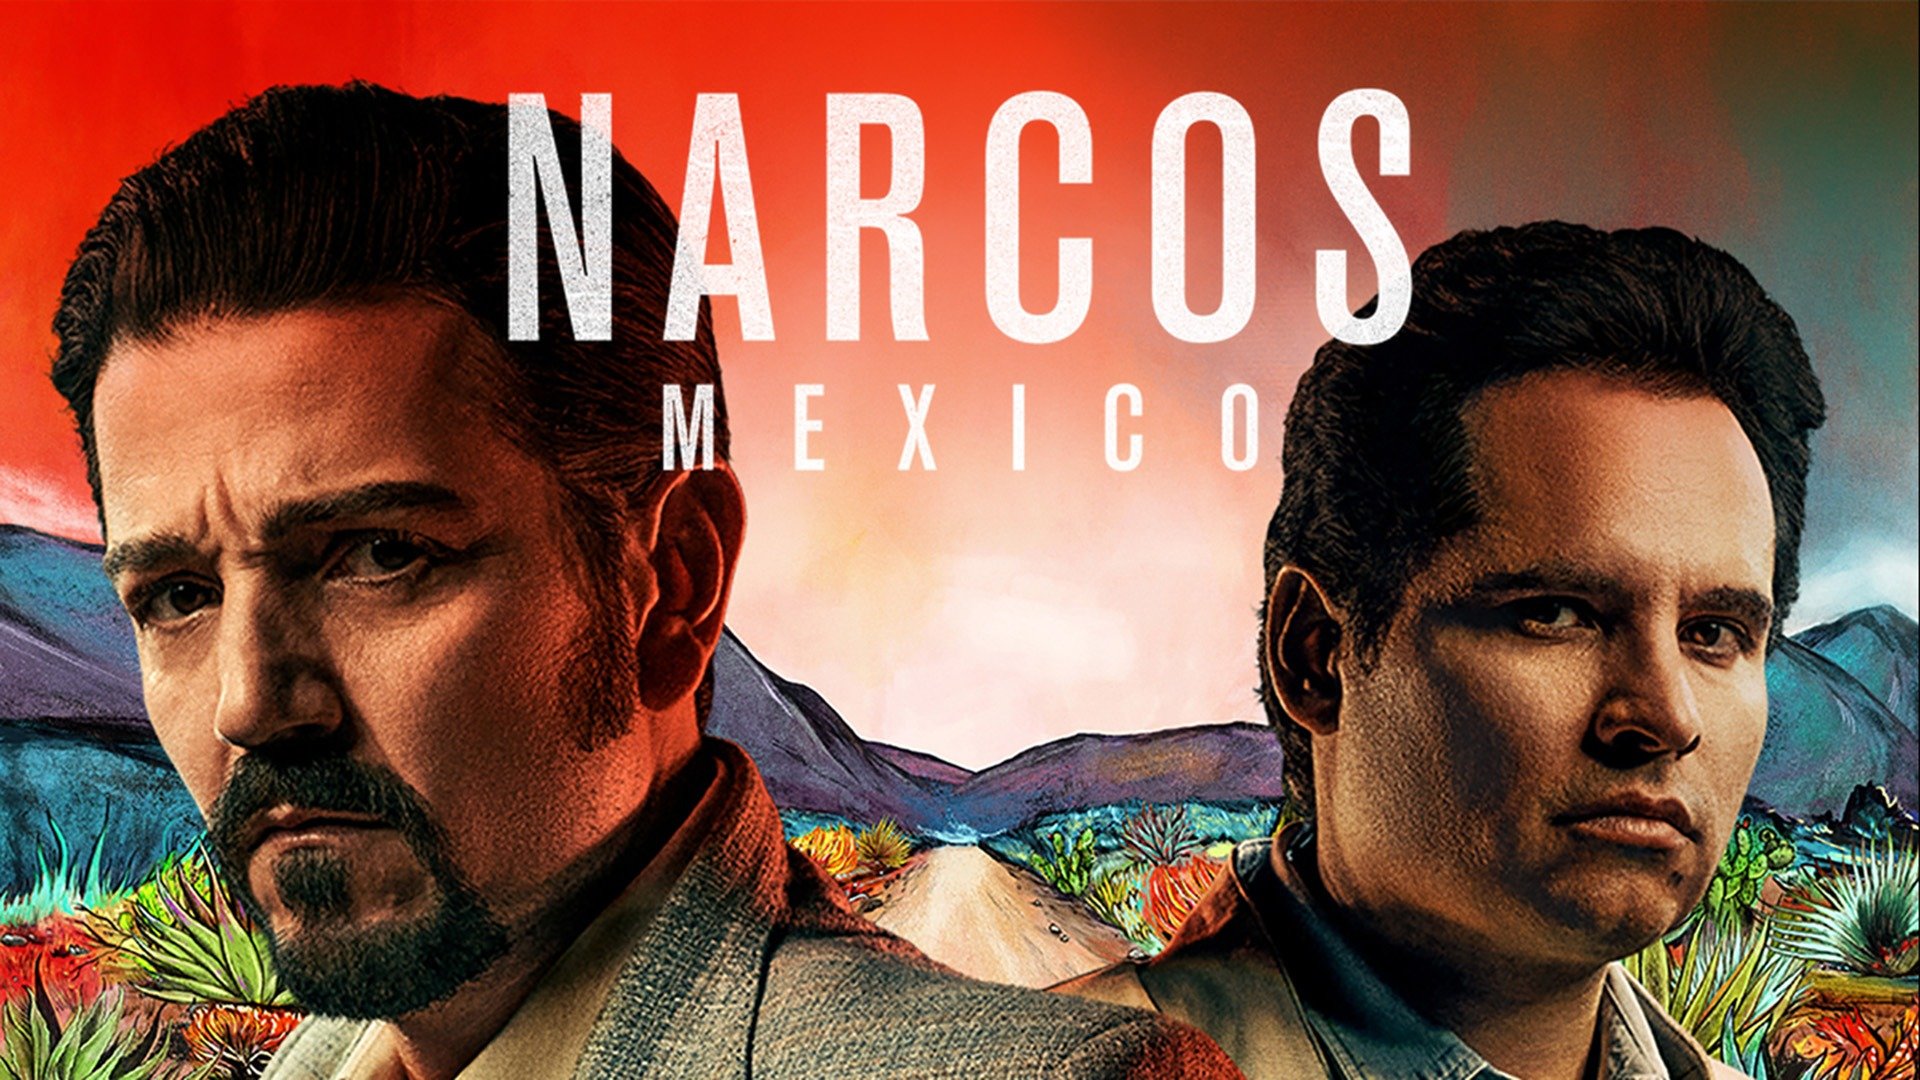 4K Narcos Mexico Wallpapers Desktop iPhone Android  Page 6 of 6  The  RamenSwag